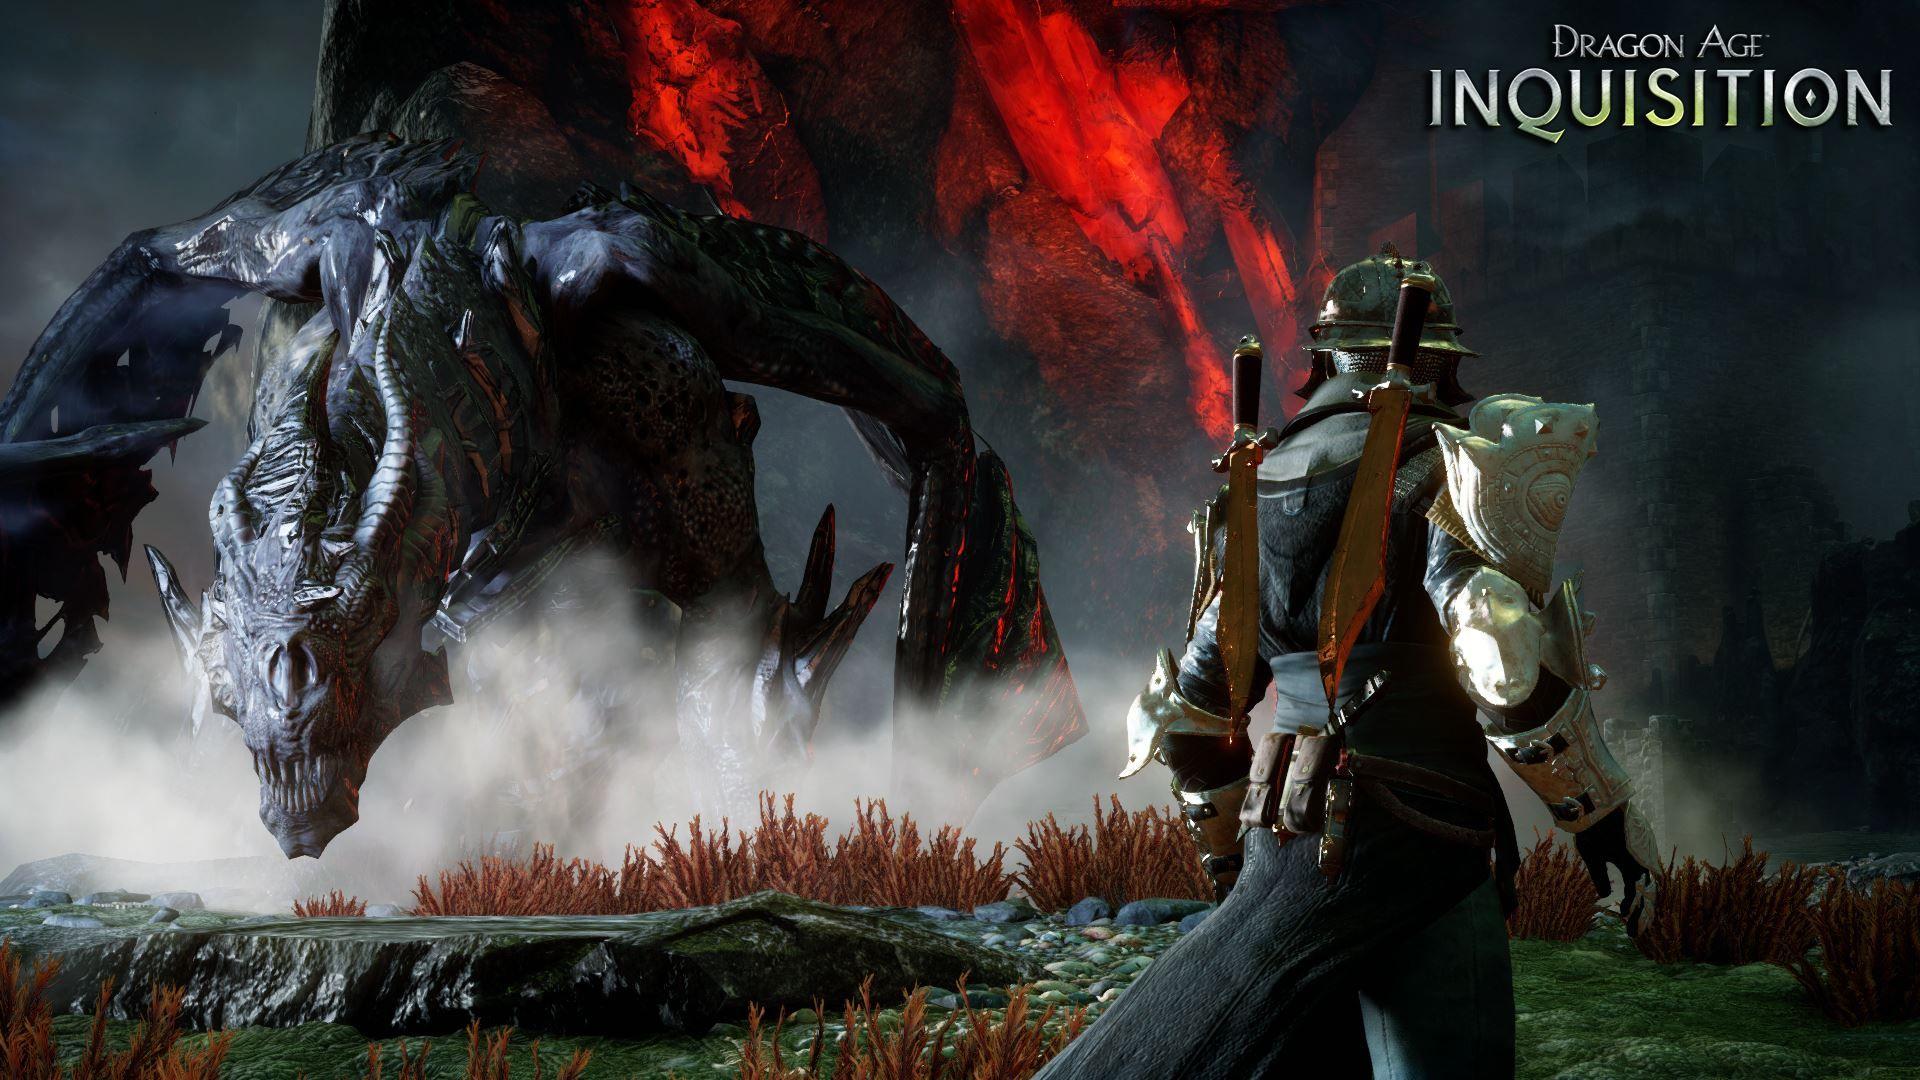 HD Dragon Age Inquisition Wallpapers